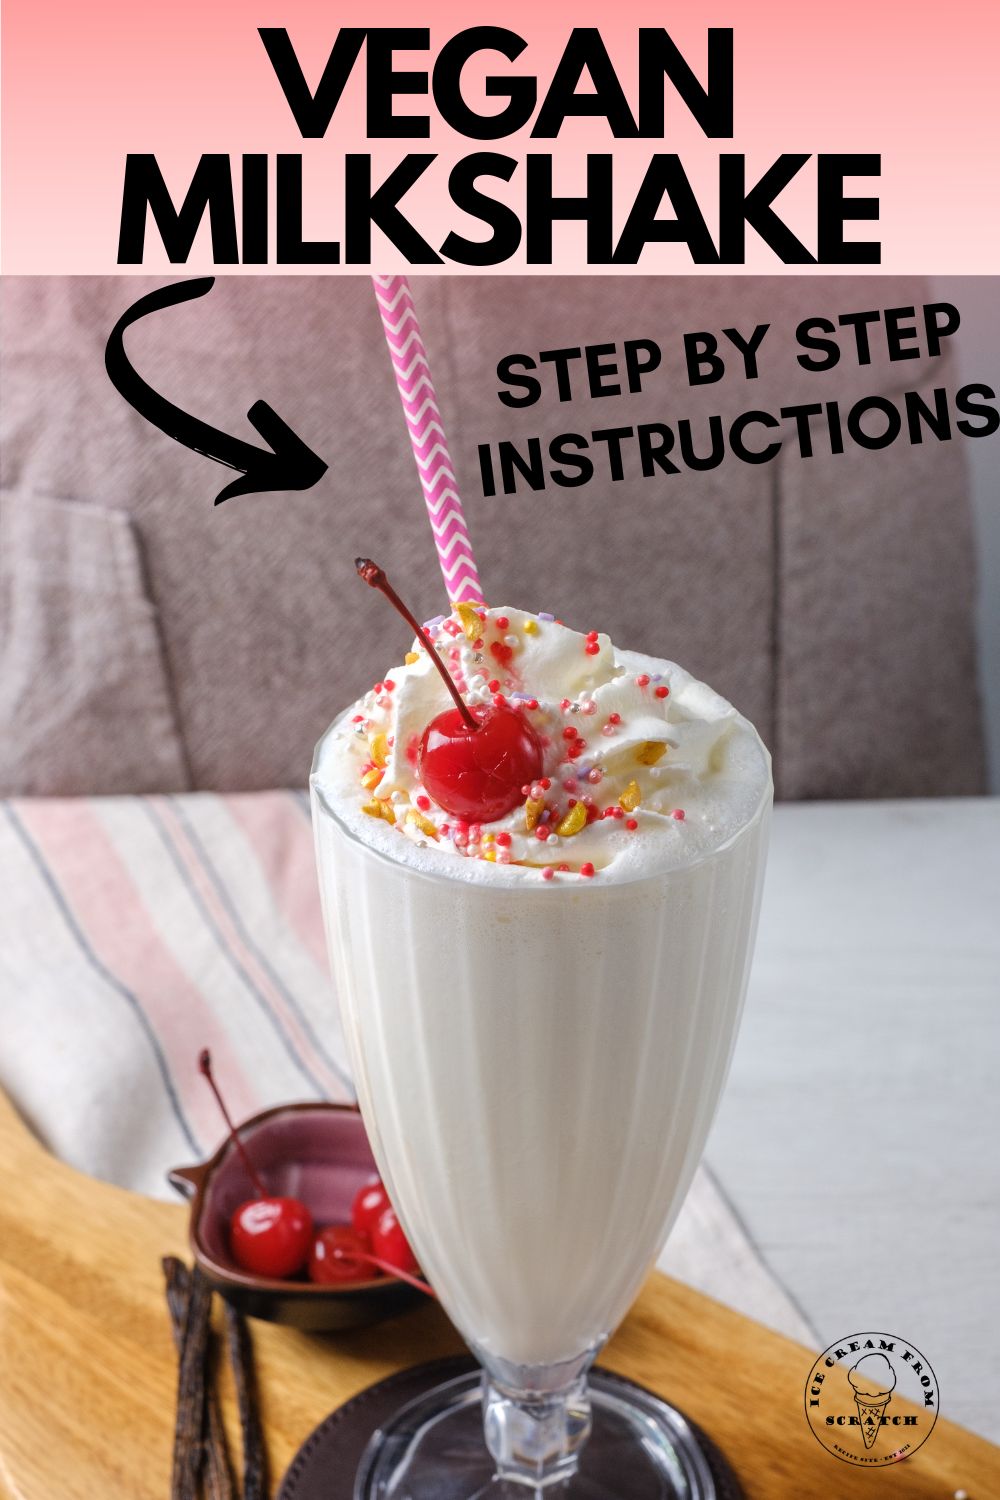 a footed milkshake glass on a leather coaster on a wooden cutten board. The glass is filled with a vegan vanilla milkshake topped with sprinkles, whipped cream, and a cherry. text at top of image says "vegan milkshake, step by step instructions"